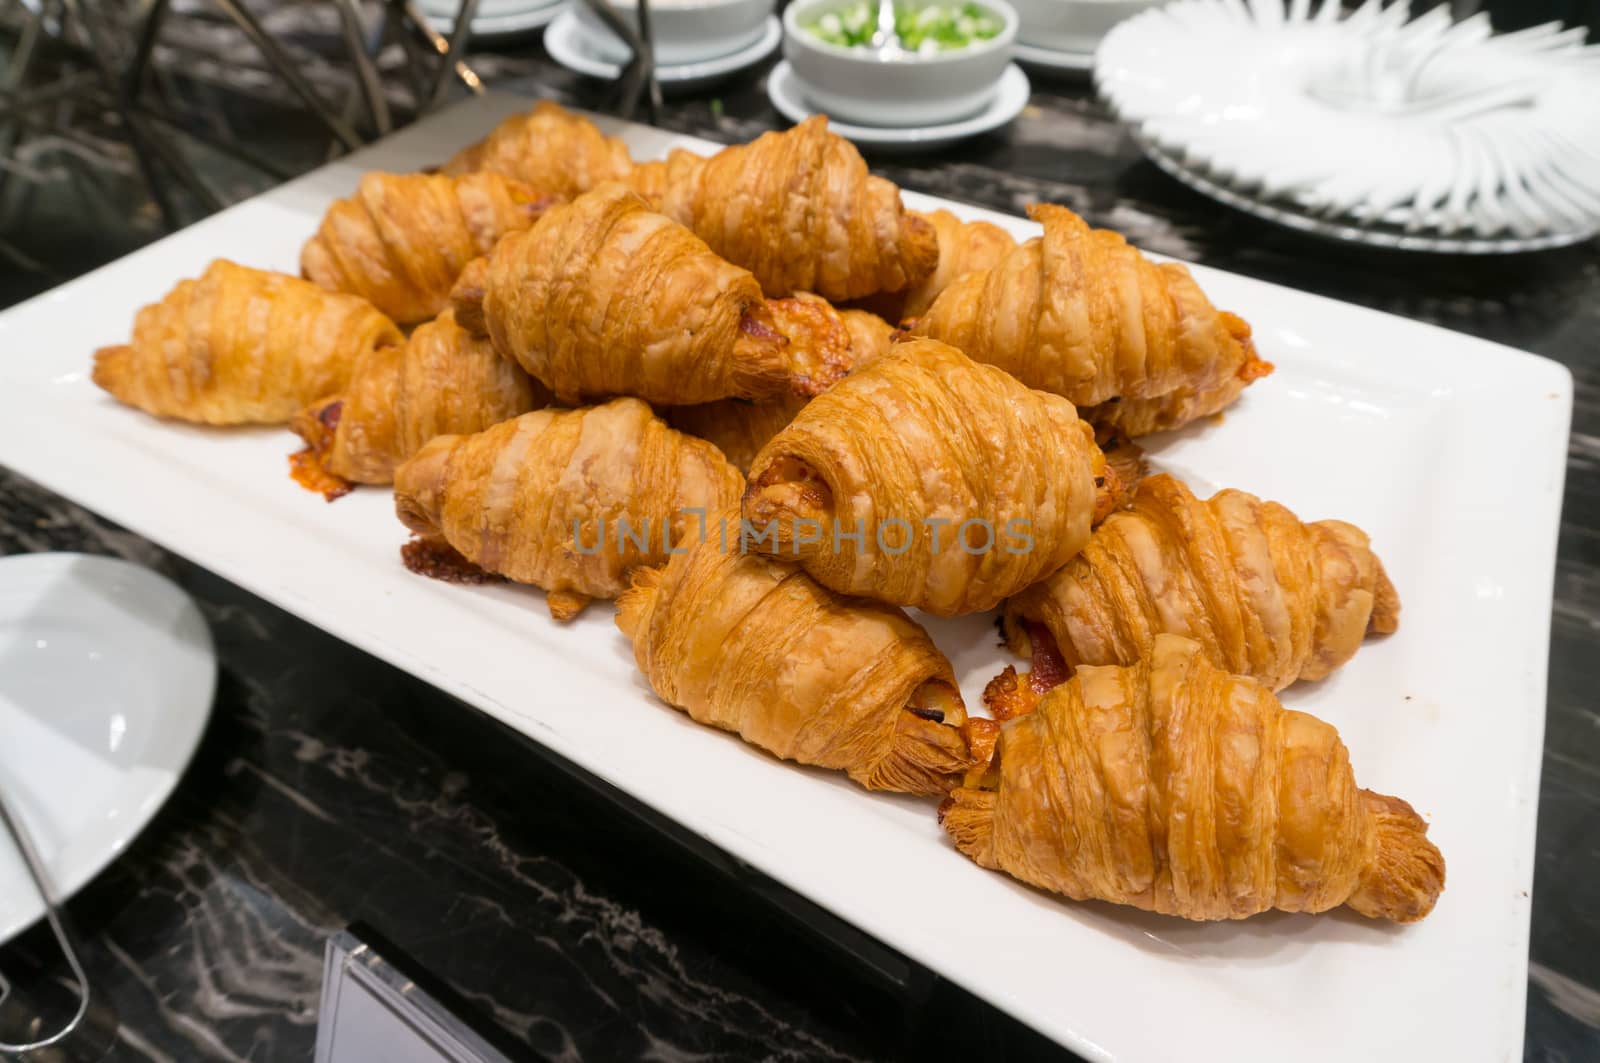 Ham and Cheese Croissant in the Plate by thampapon